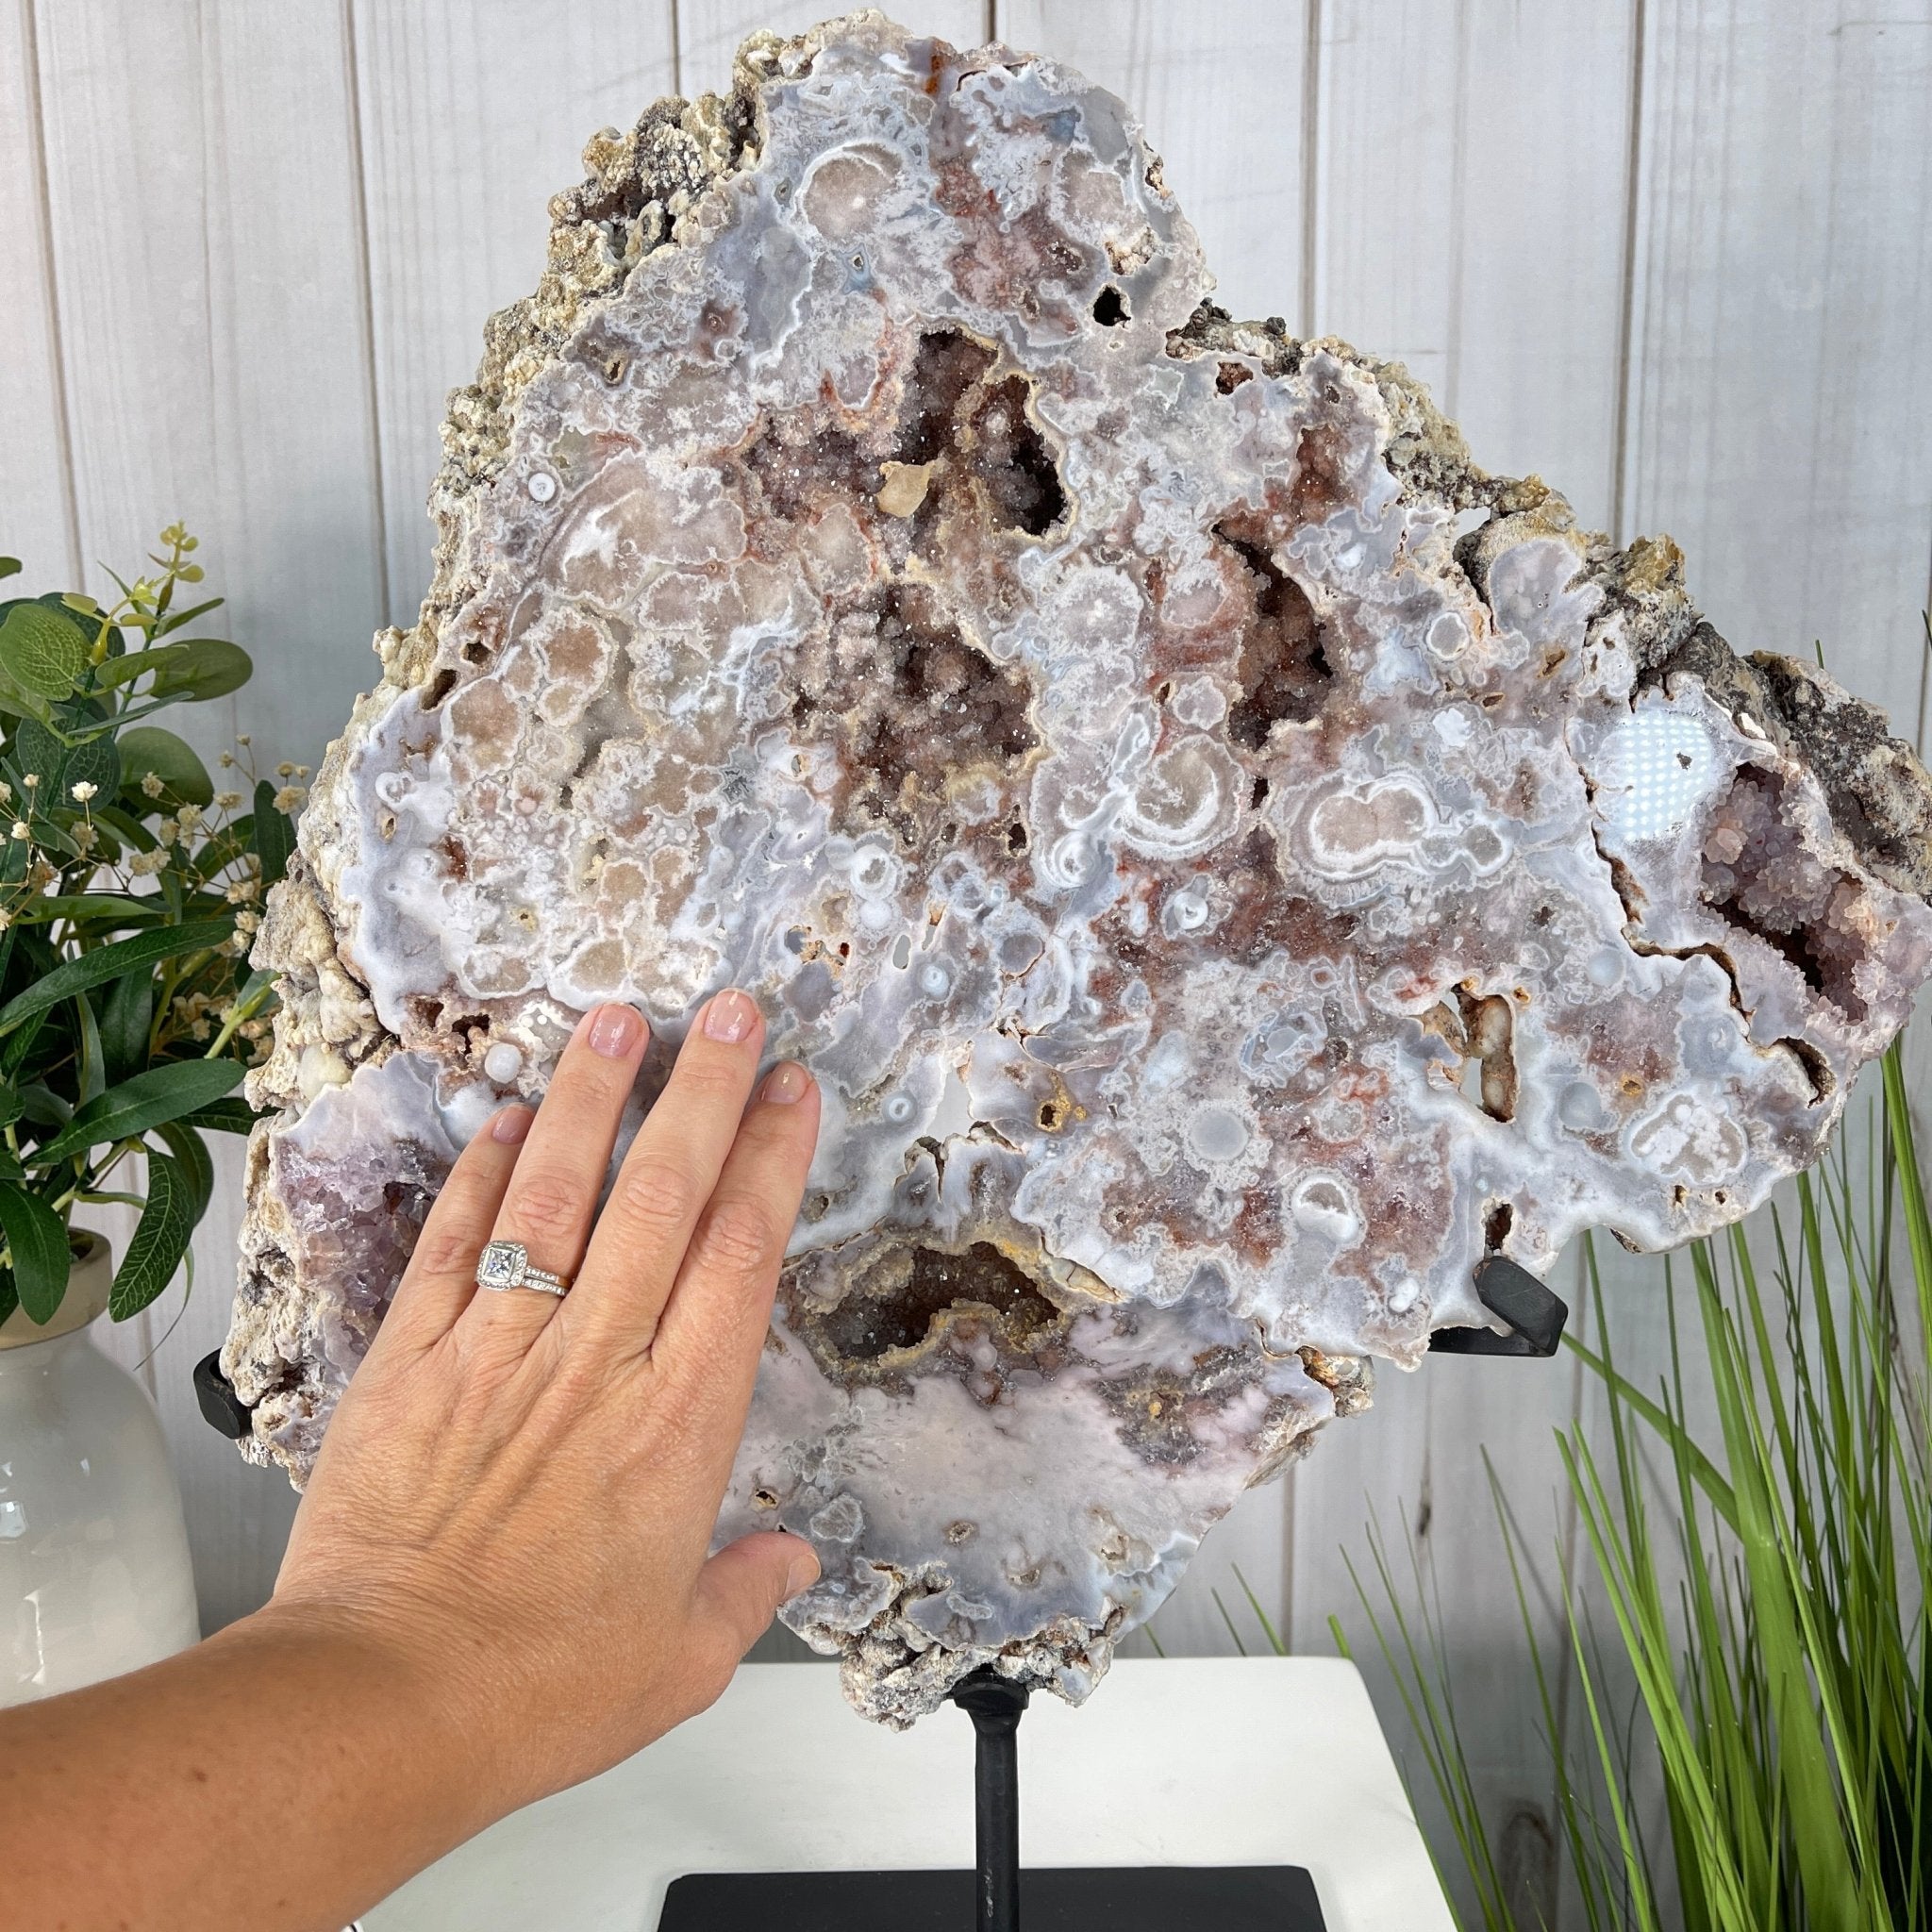 Pink Amethyst Slice on a Stand, 16.1 lbs and 20.4" Tall #5742-0003 by Brazil Gems - Brazil GemsBrazil GemsPink Amethyst Slice on a Stand, 16.1 lbs and 20.4" Tall #5742-0003 by Brazil GemsSlices on Fixed Bases5742-0003